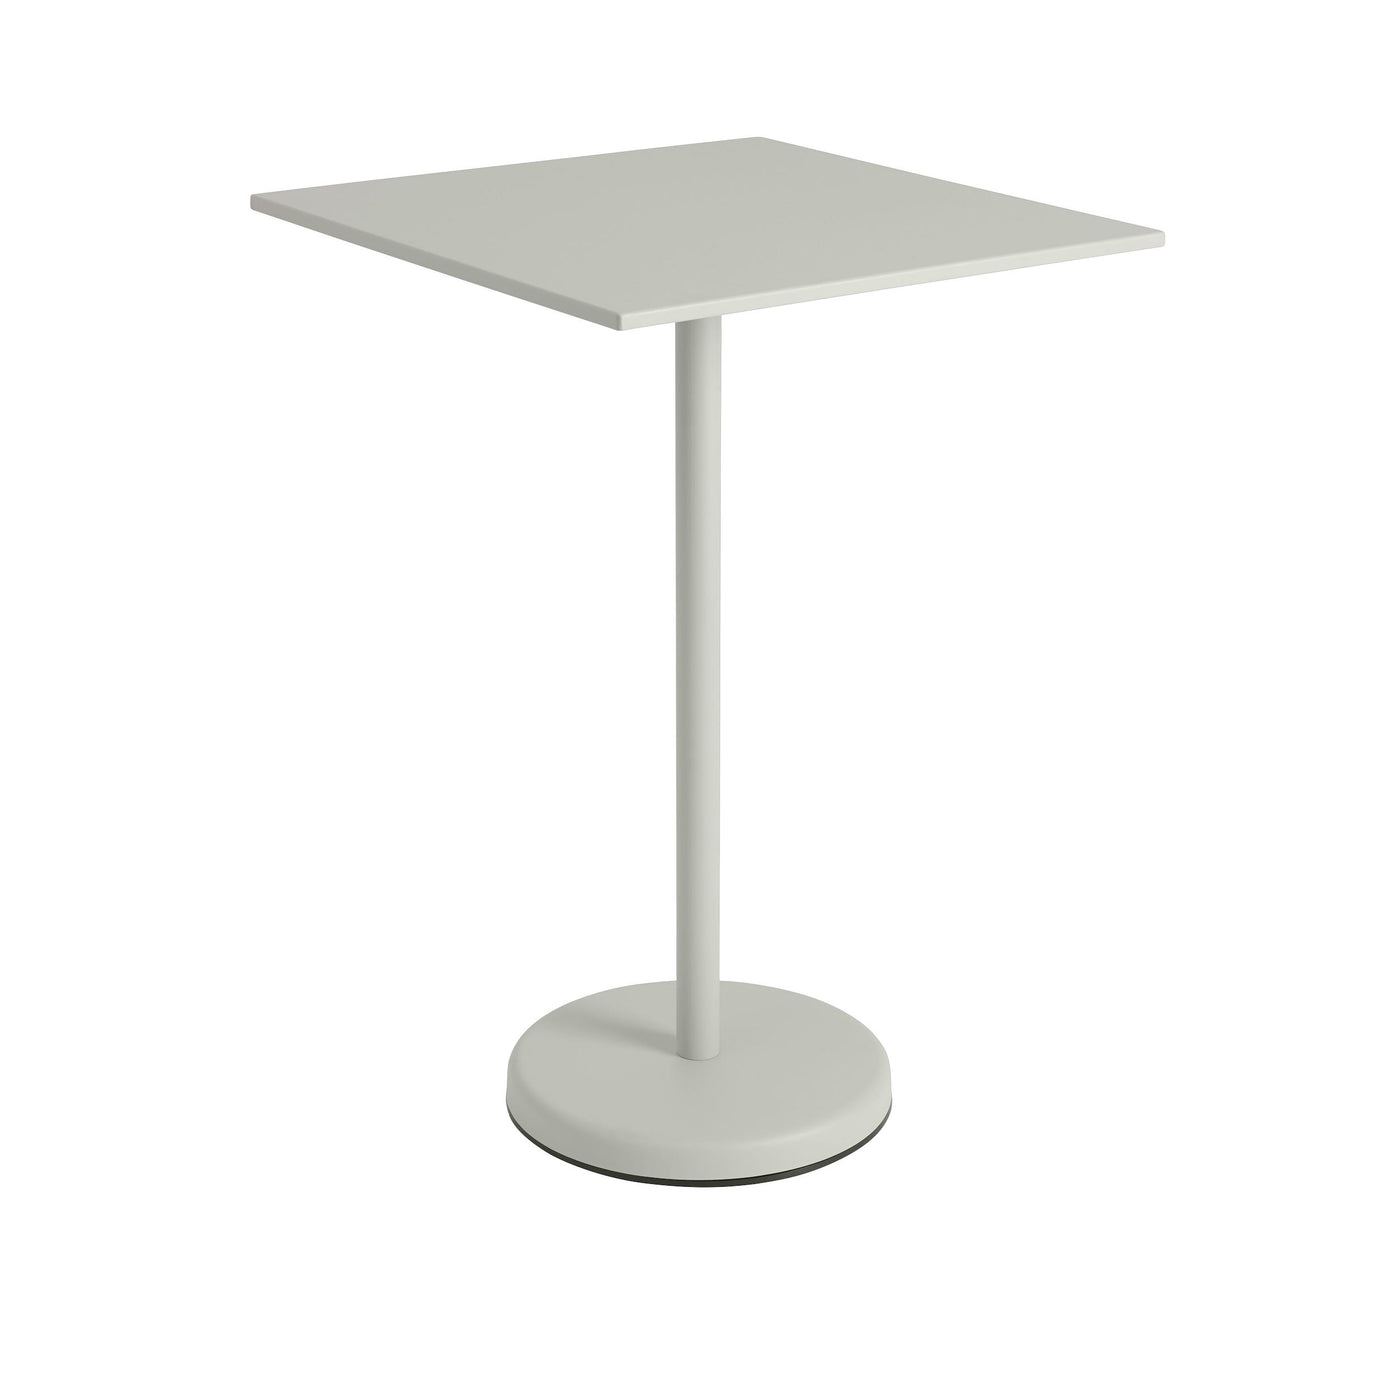 Muuto Linear Steel Cafe Table Square. Shop outdoor furniture at someday designs. #colour_grey